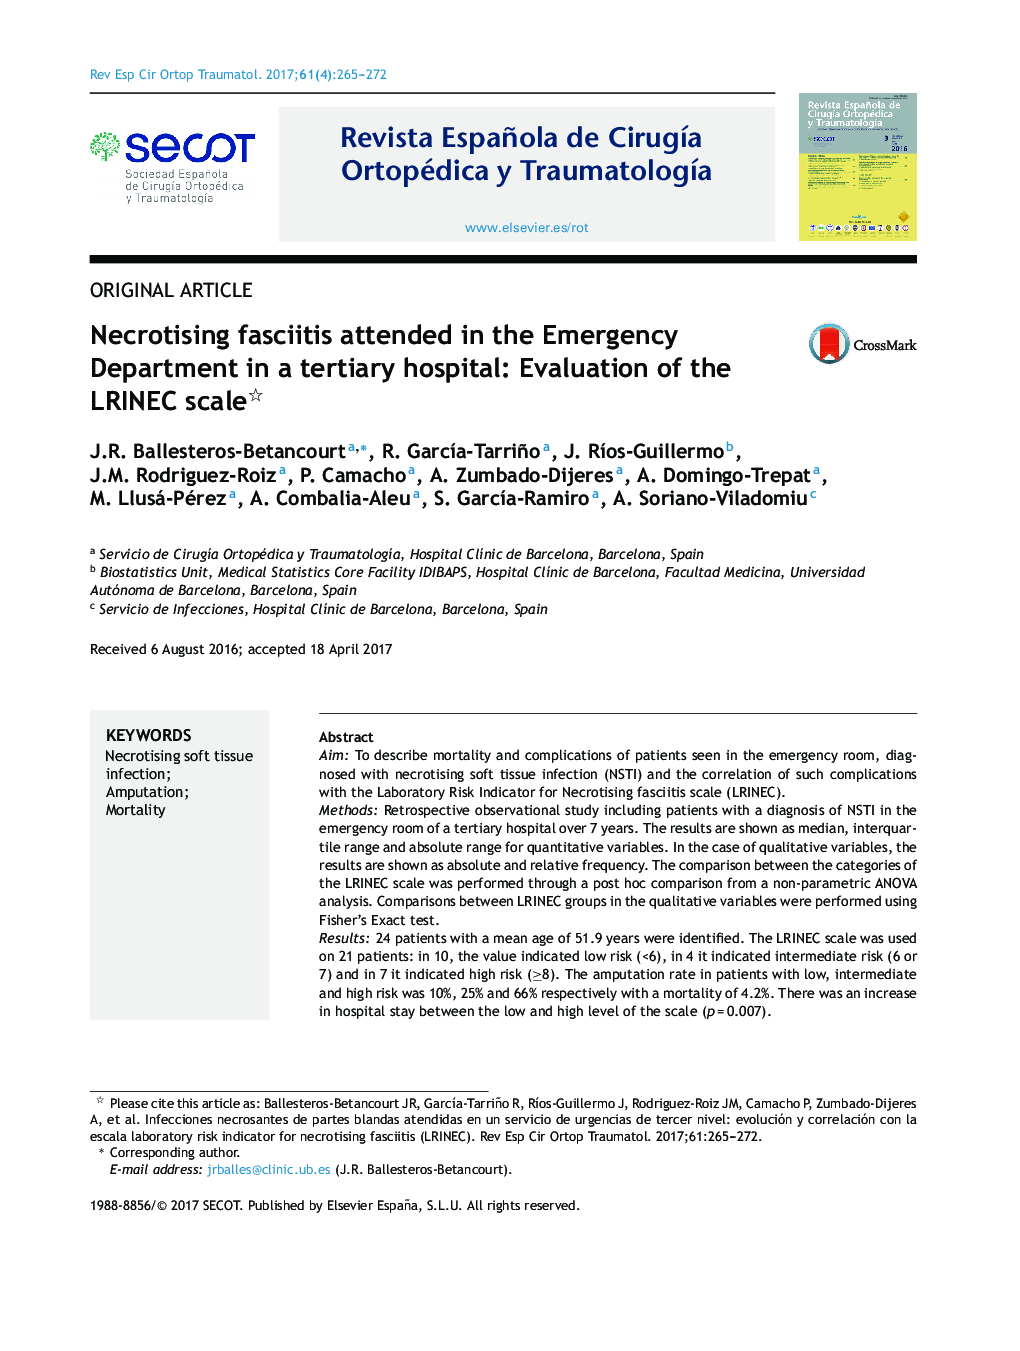 Necrotising fasciitis attended in the Emergency Department in a tertiary hospital: Evaluation of the LRINEC scale